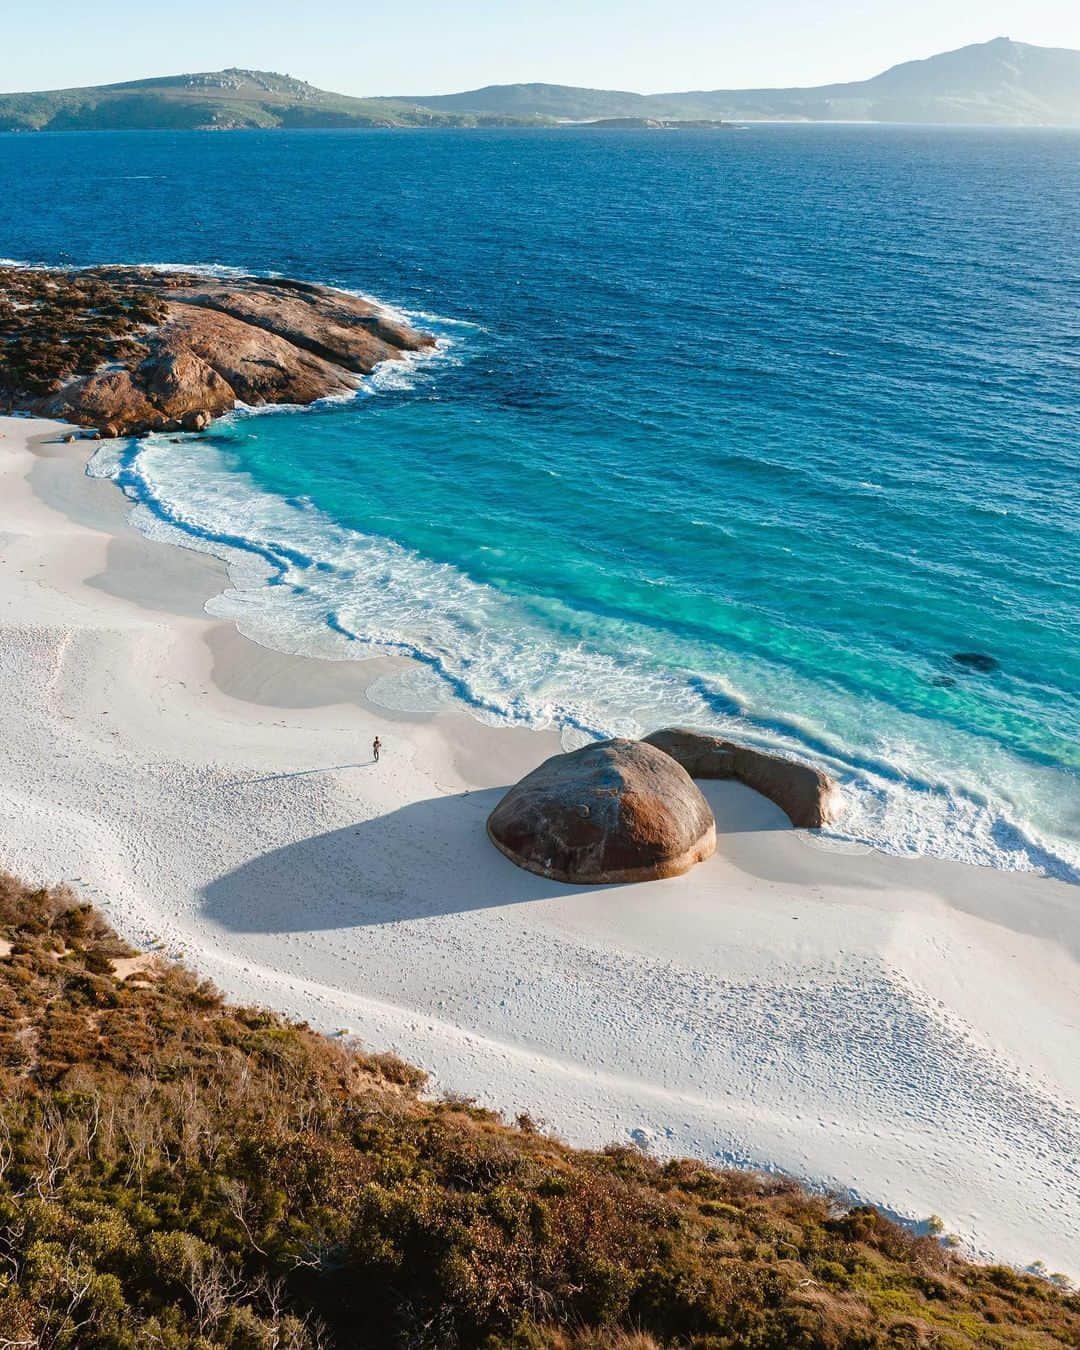 Coronaのインスタグラム：「Looking for a spot to relax by the sea in Western Australia? ⁣ ⁣ Little Beach in Albany is an idyllic white sand beach, made for kicking back and taking in all nature has to offer. ⁣ ⁣ Adding to the picturesque landscape for visitors are large granite boulders like the one pictured which make the beach distinctly different. From snorkeling, to laying out, to scaling the rocks, there’s an activity for everyone. ⁣ ⁣ #ThisIsLiving⁣ ⁣ 📸: @dylan_alcock⁣ ⁣ #Australia」